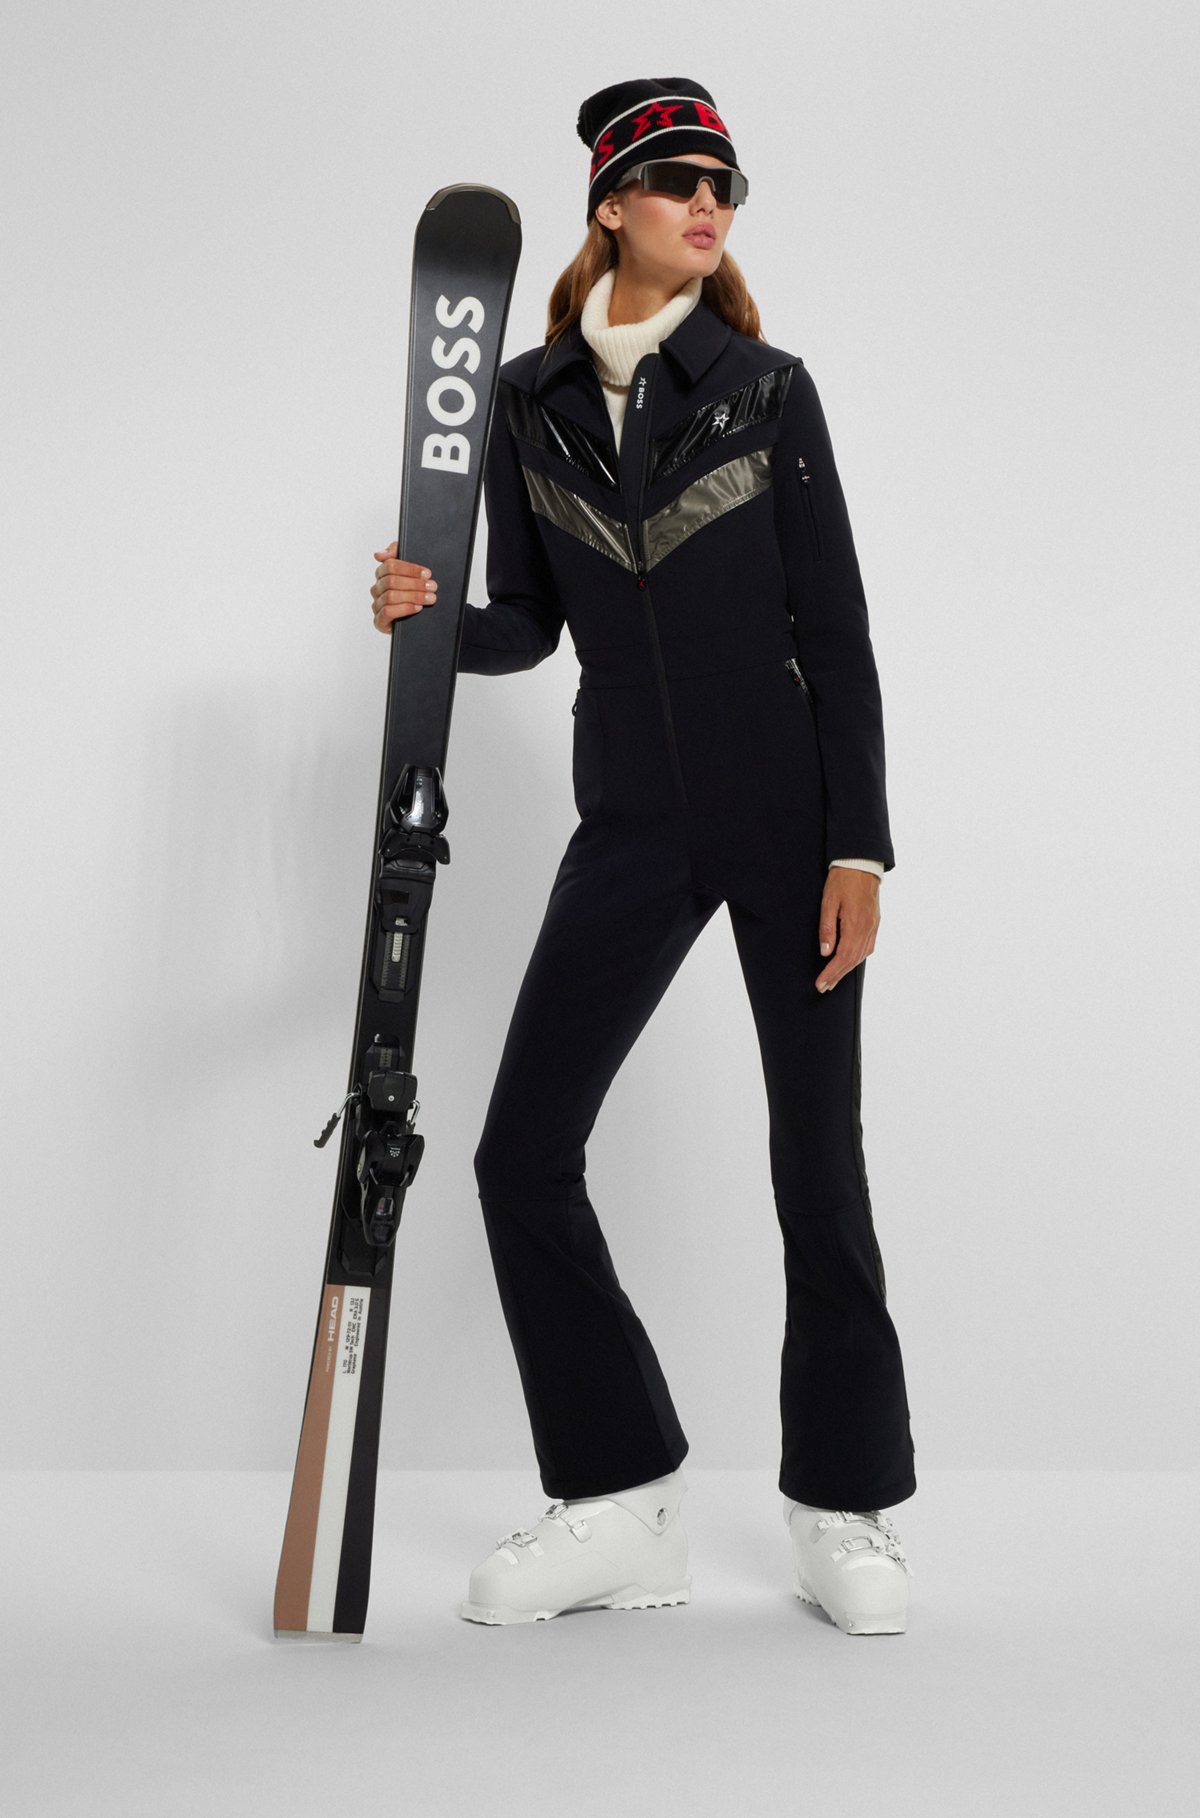 BOSS - BOSS x Perfect Moment branded ski suit with stripes